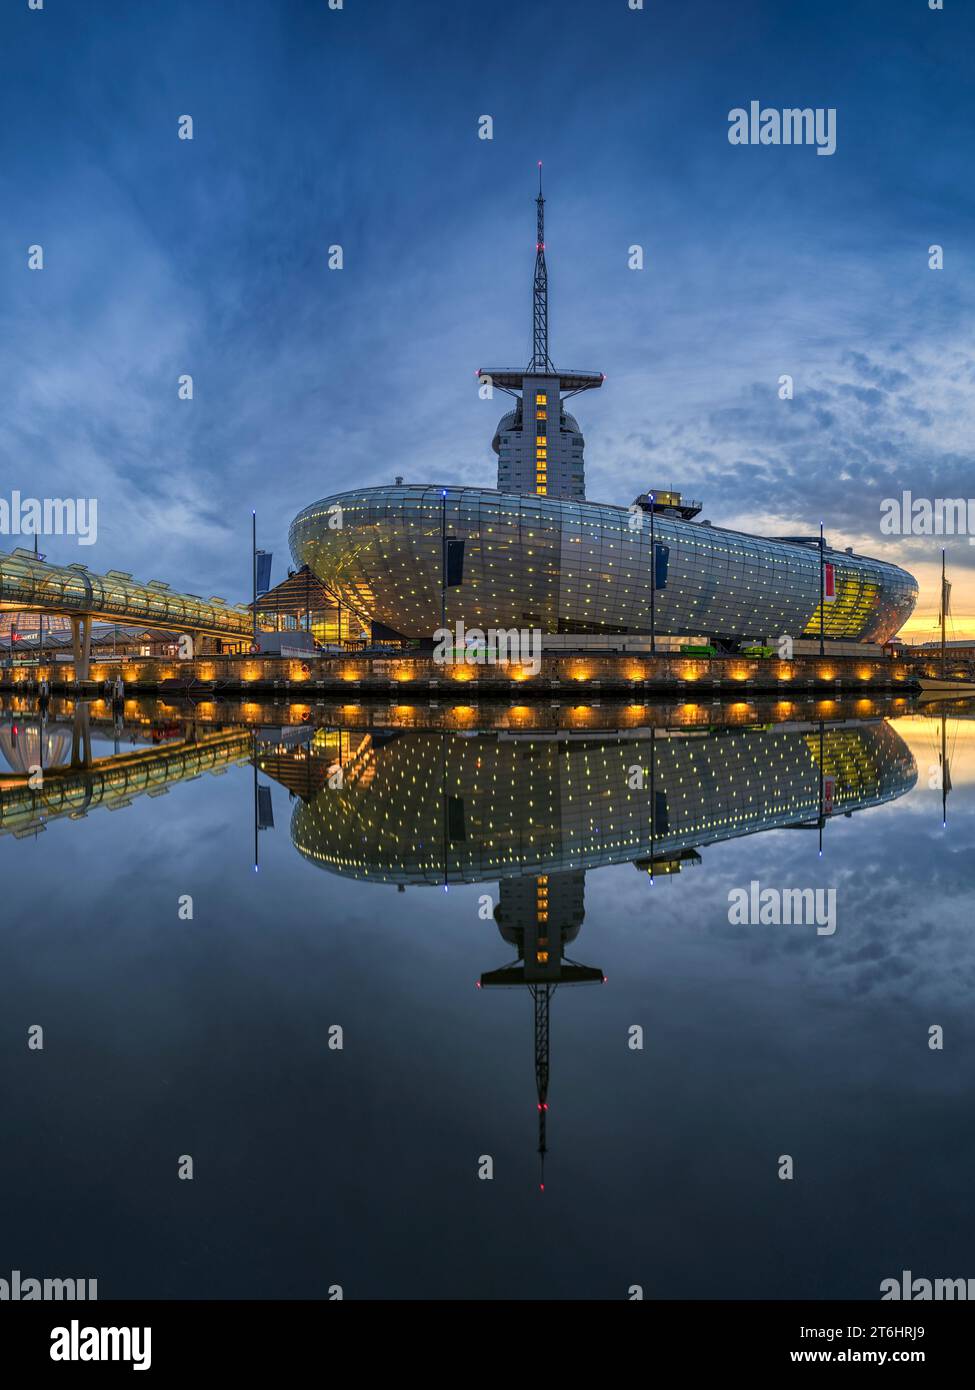 Klimahaus in Bremerhaven, Germany at night Stock Photo